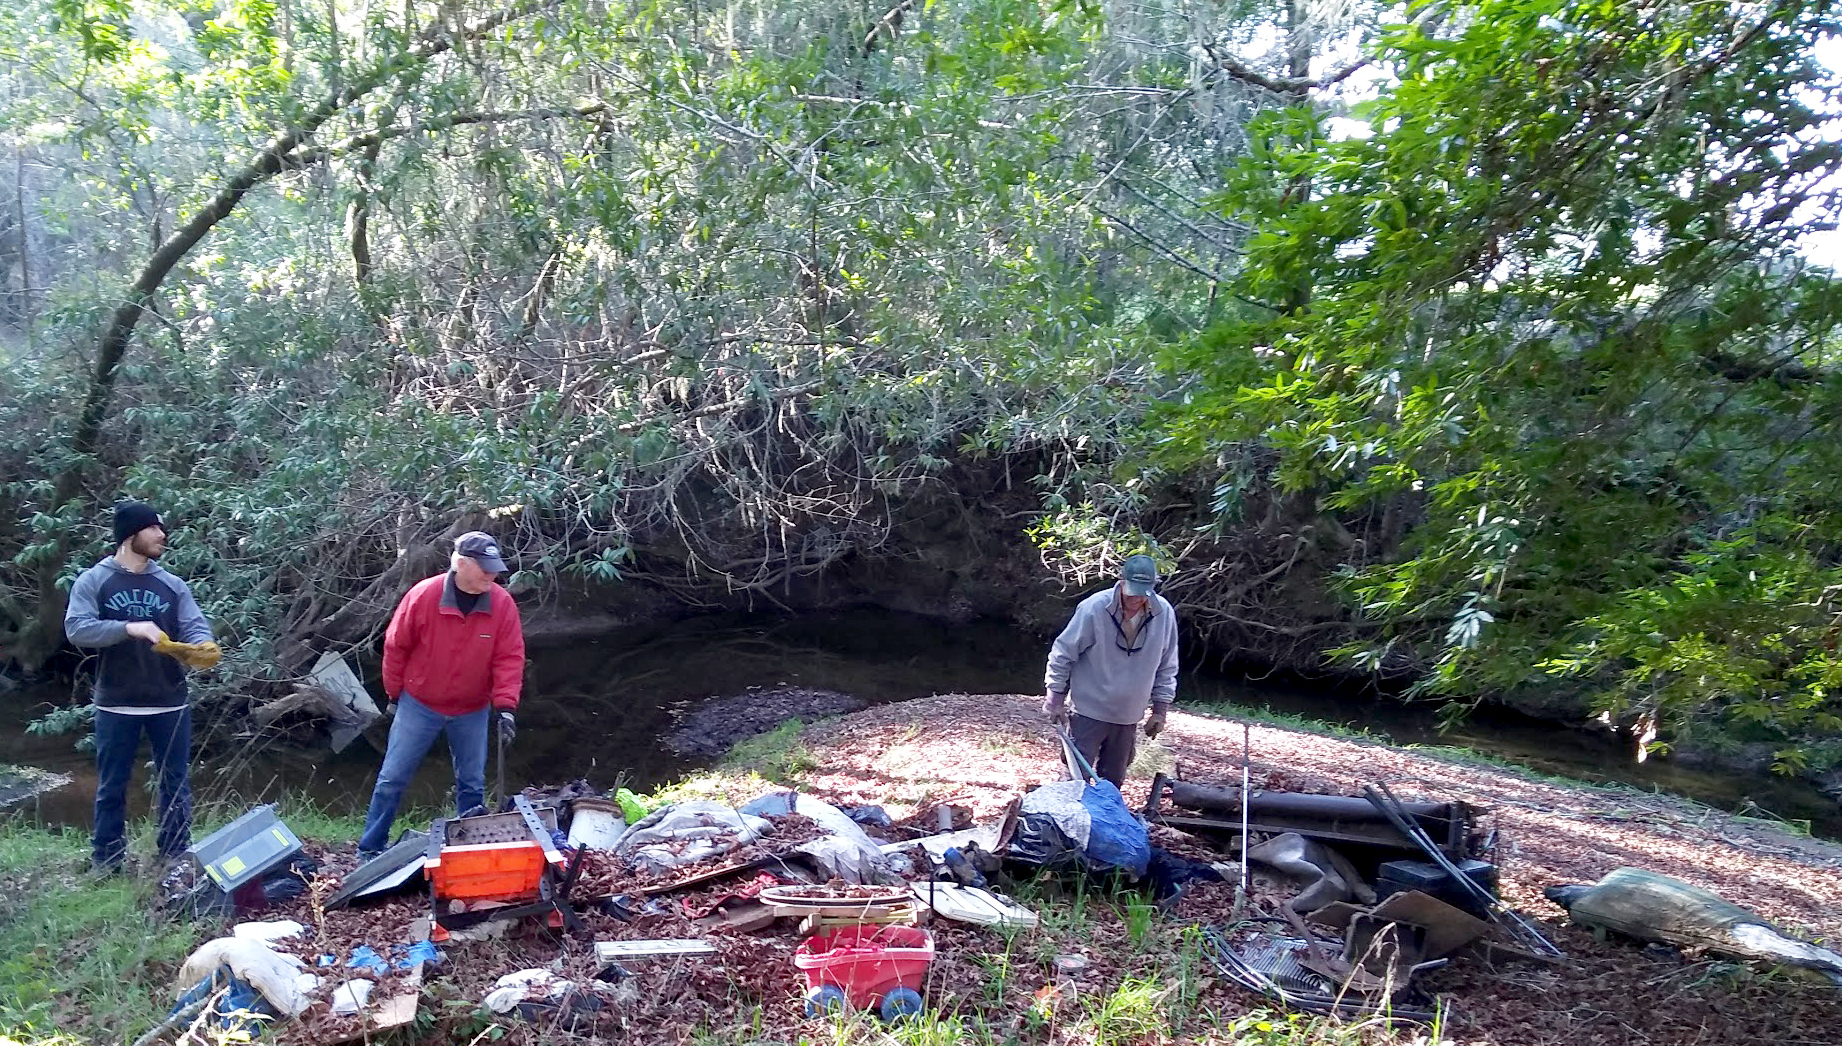 Staff and volunteers of the Salmon Protection and Watershed Network (SPAWN) removed garbage and debris from the remains of a camp in Lagunitas on Friday, Jan. 4 that would otherwise be carried downstream by forecasted storms. | Photo by Turtle Island Restoration Network